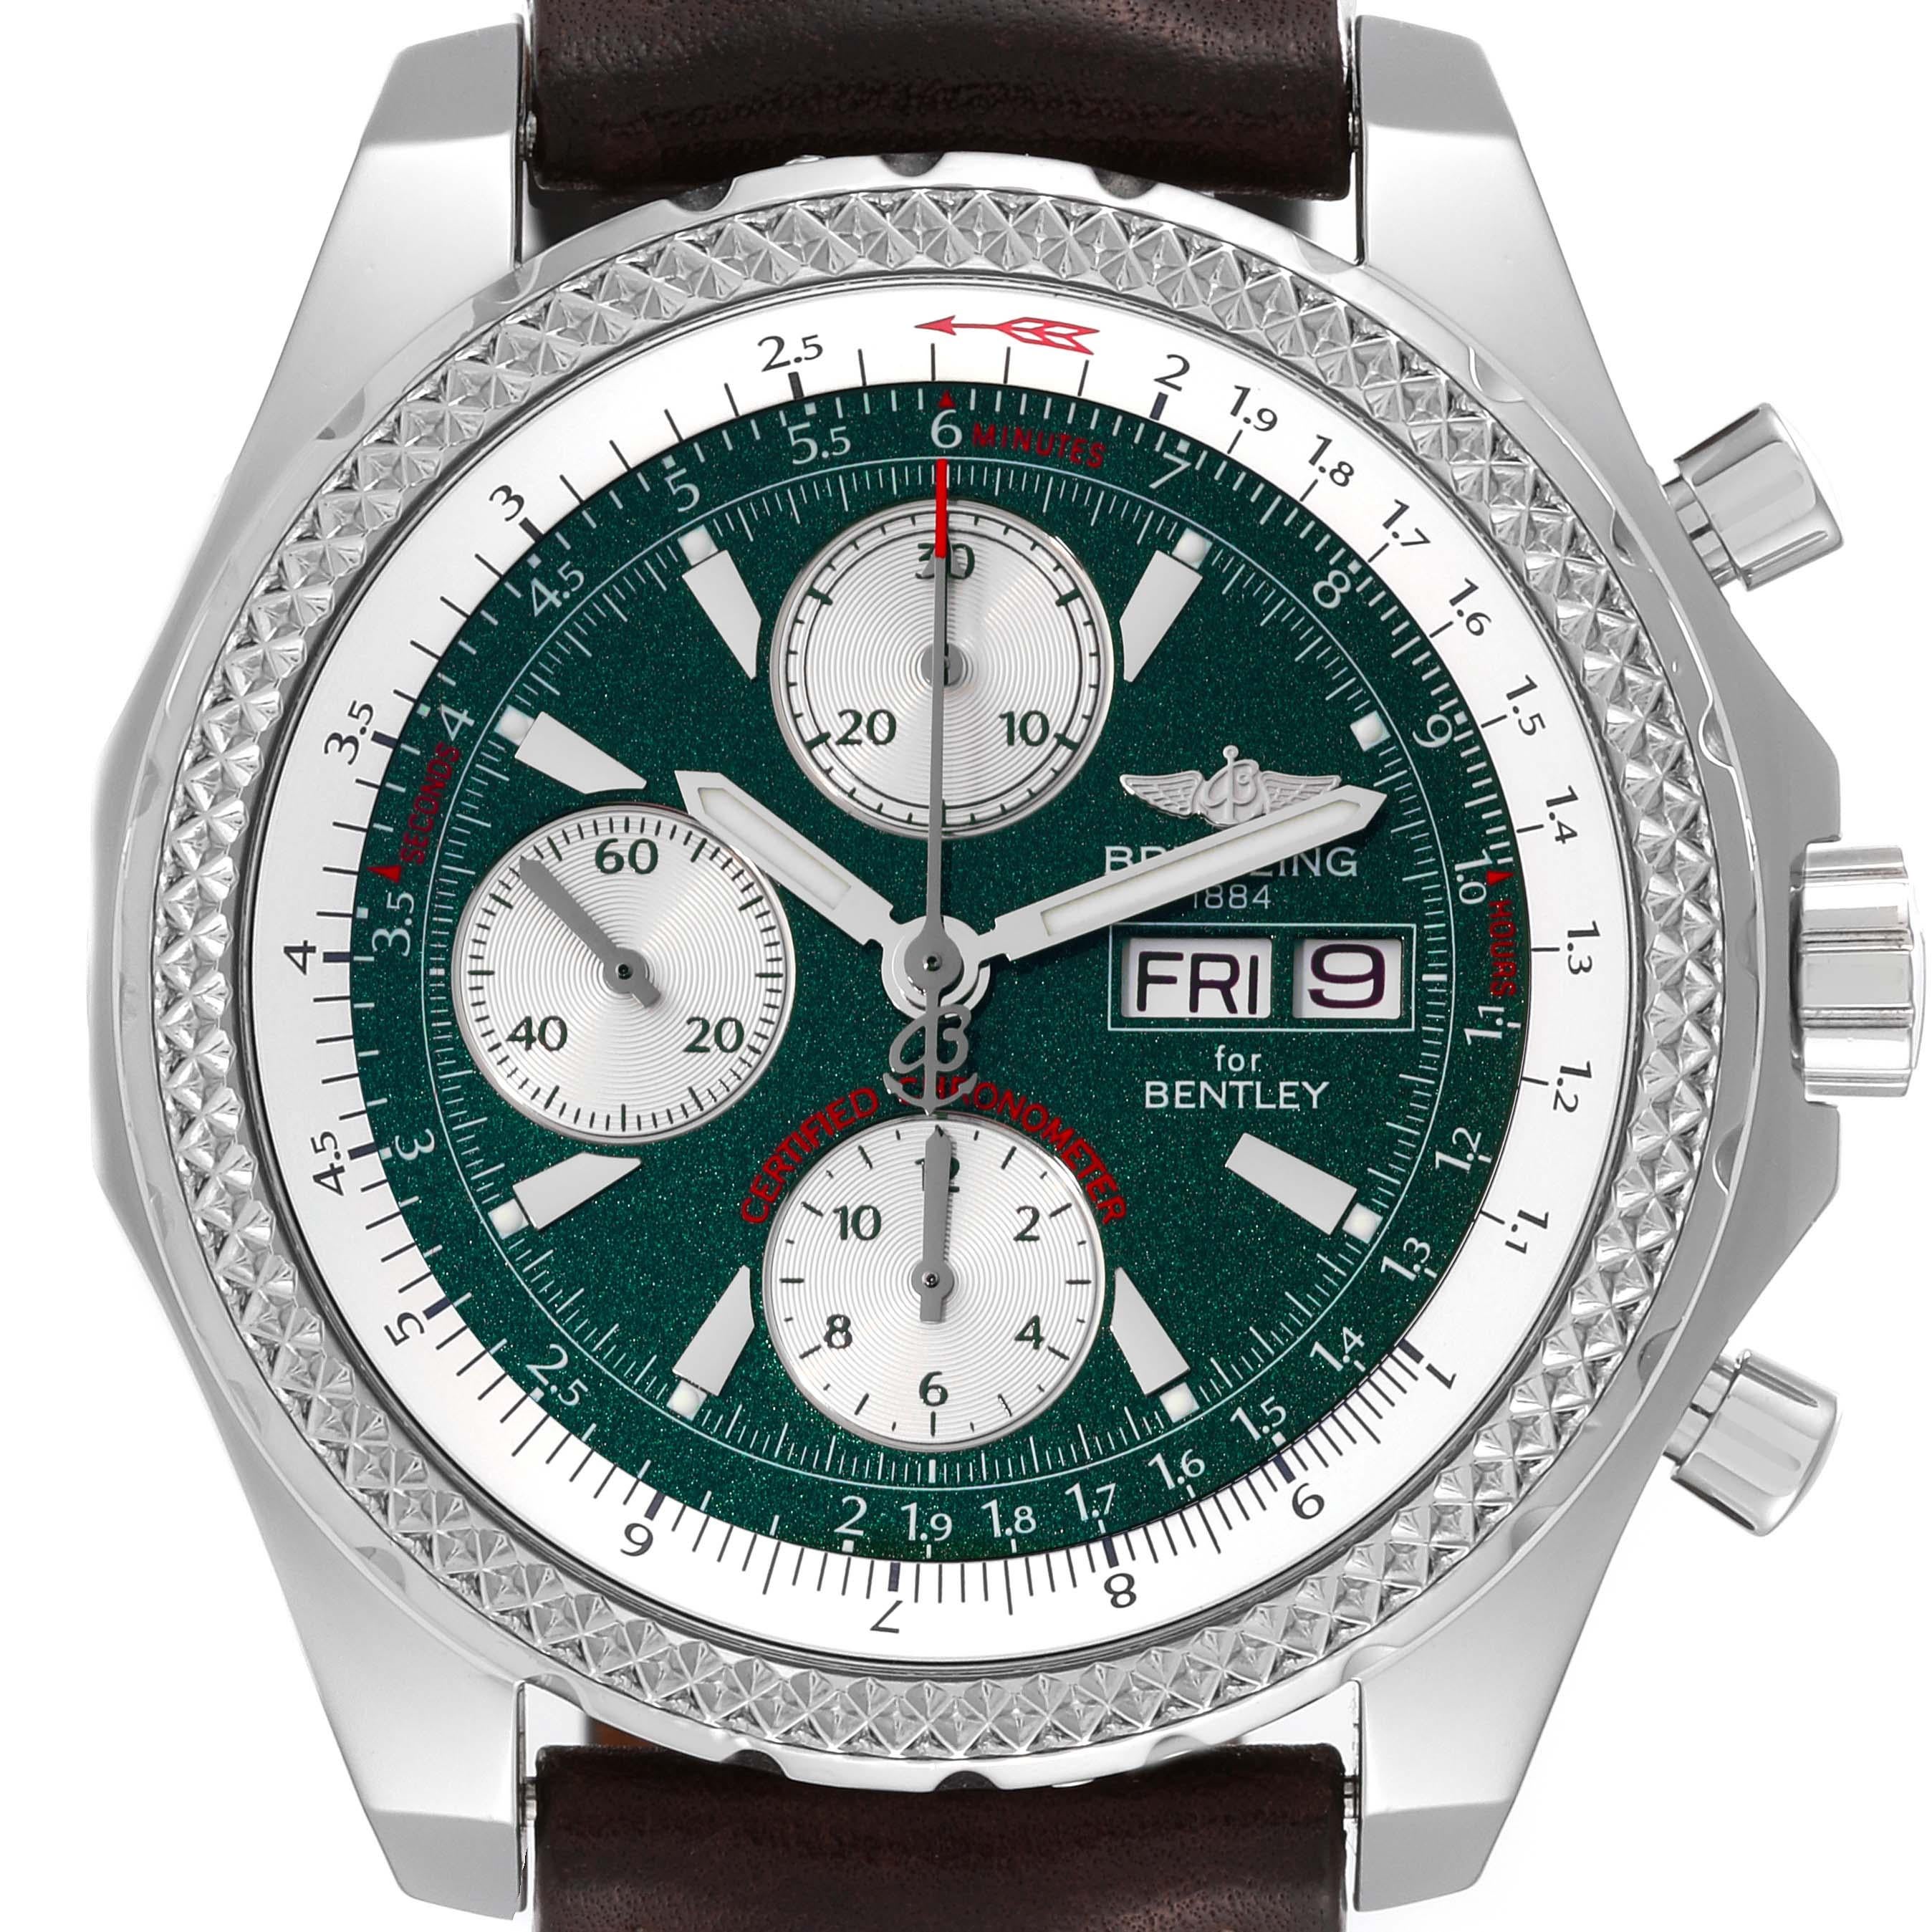 Breitling Bentley Motors GT Green Special Edition Steel Mens Watch A13362. Self-winding automatic officially certified chronometer movement. Chronograph function. Stainless steel case 44.8 mm in diameter. Stainless steel screwed-down crown and